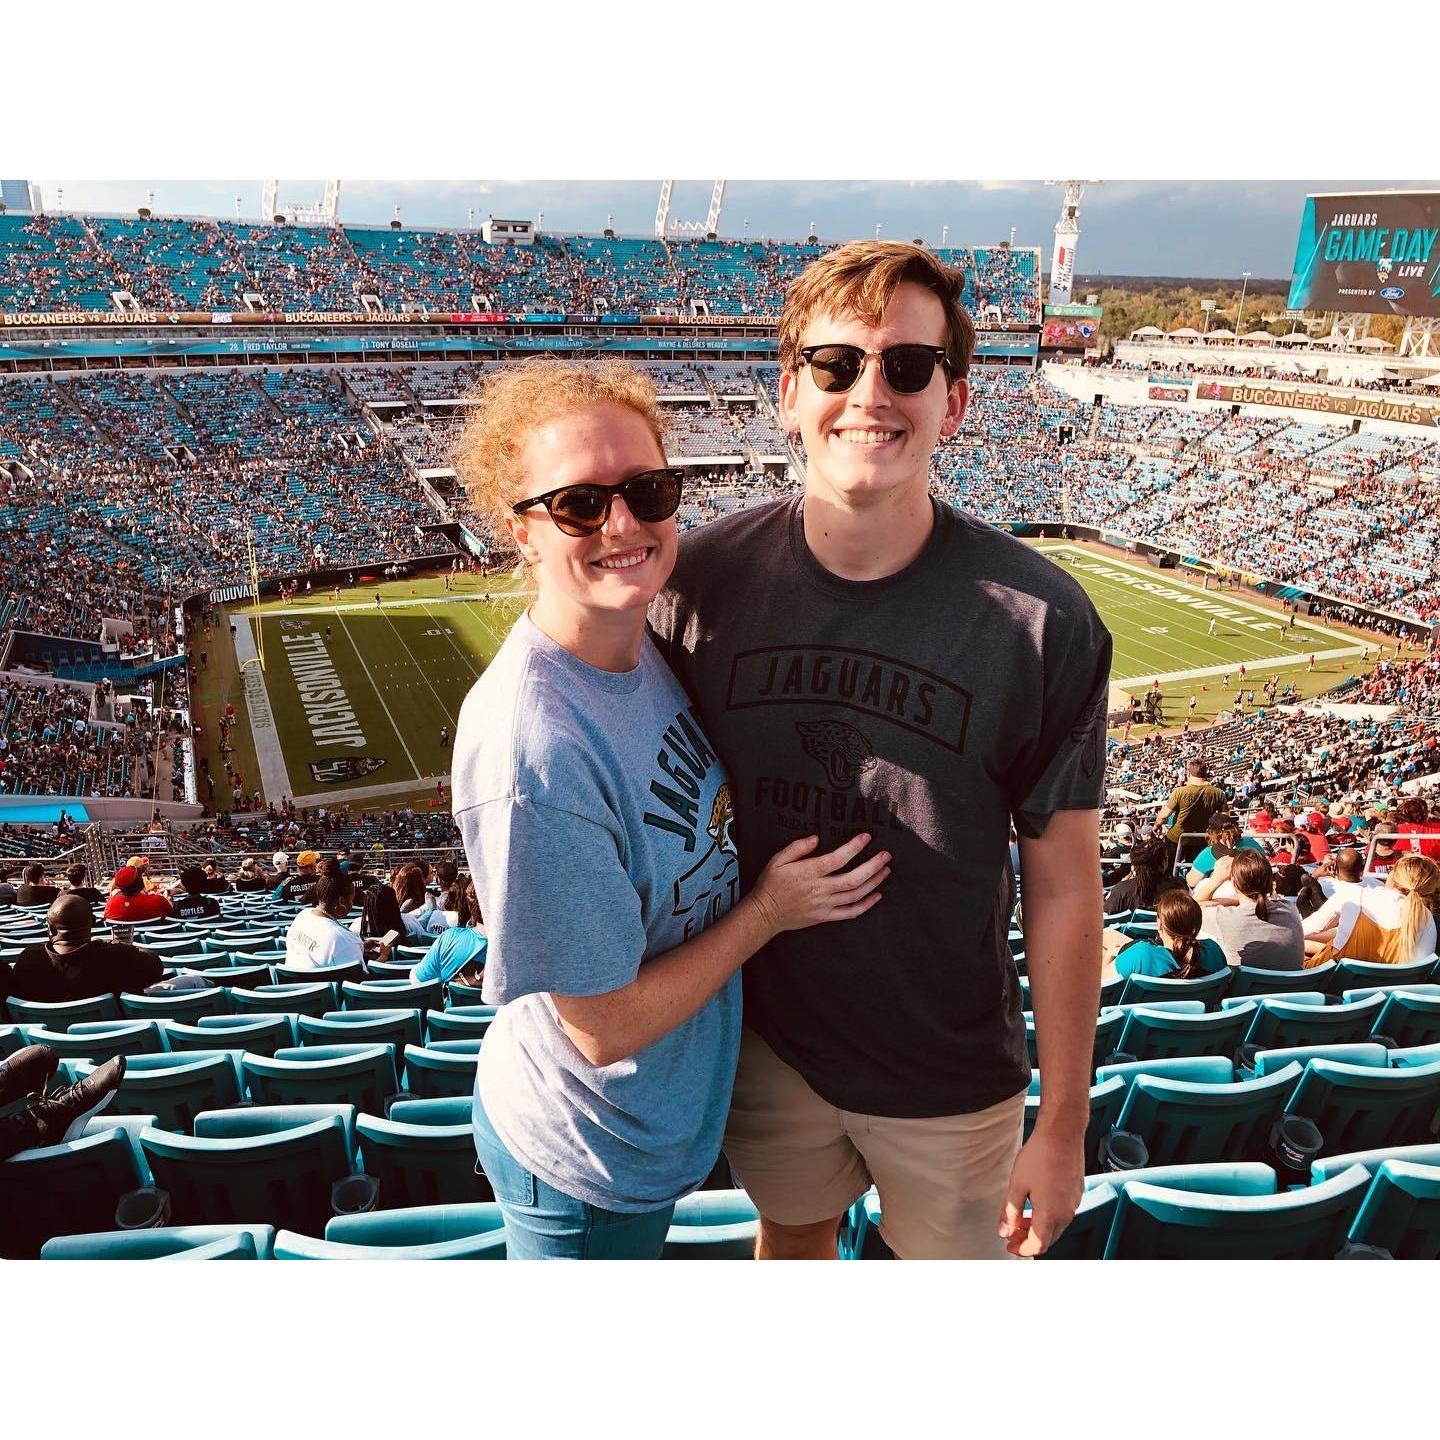 Our first Jacksonville Jaguars game and the return of Minshew Mania